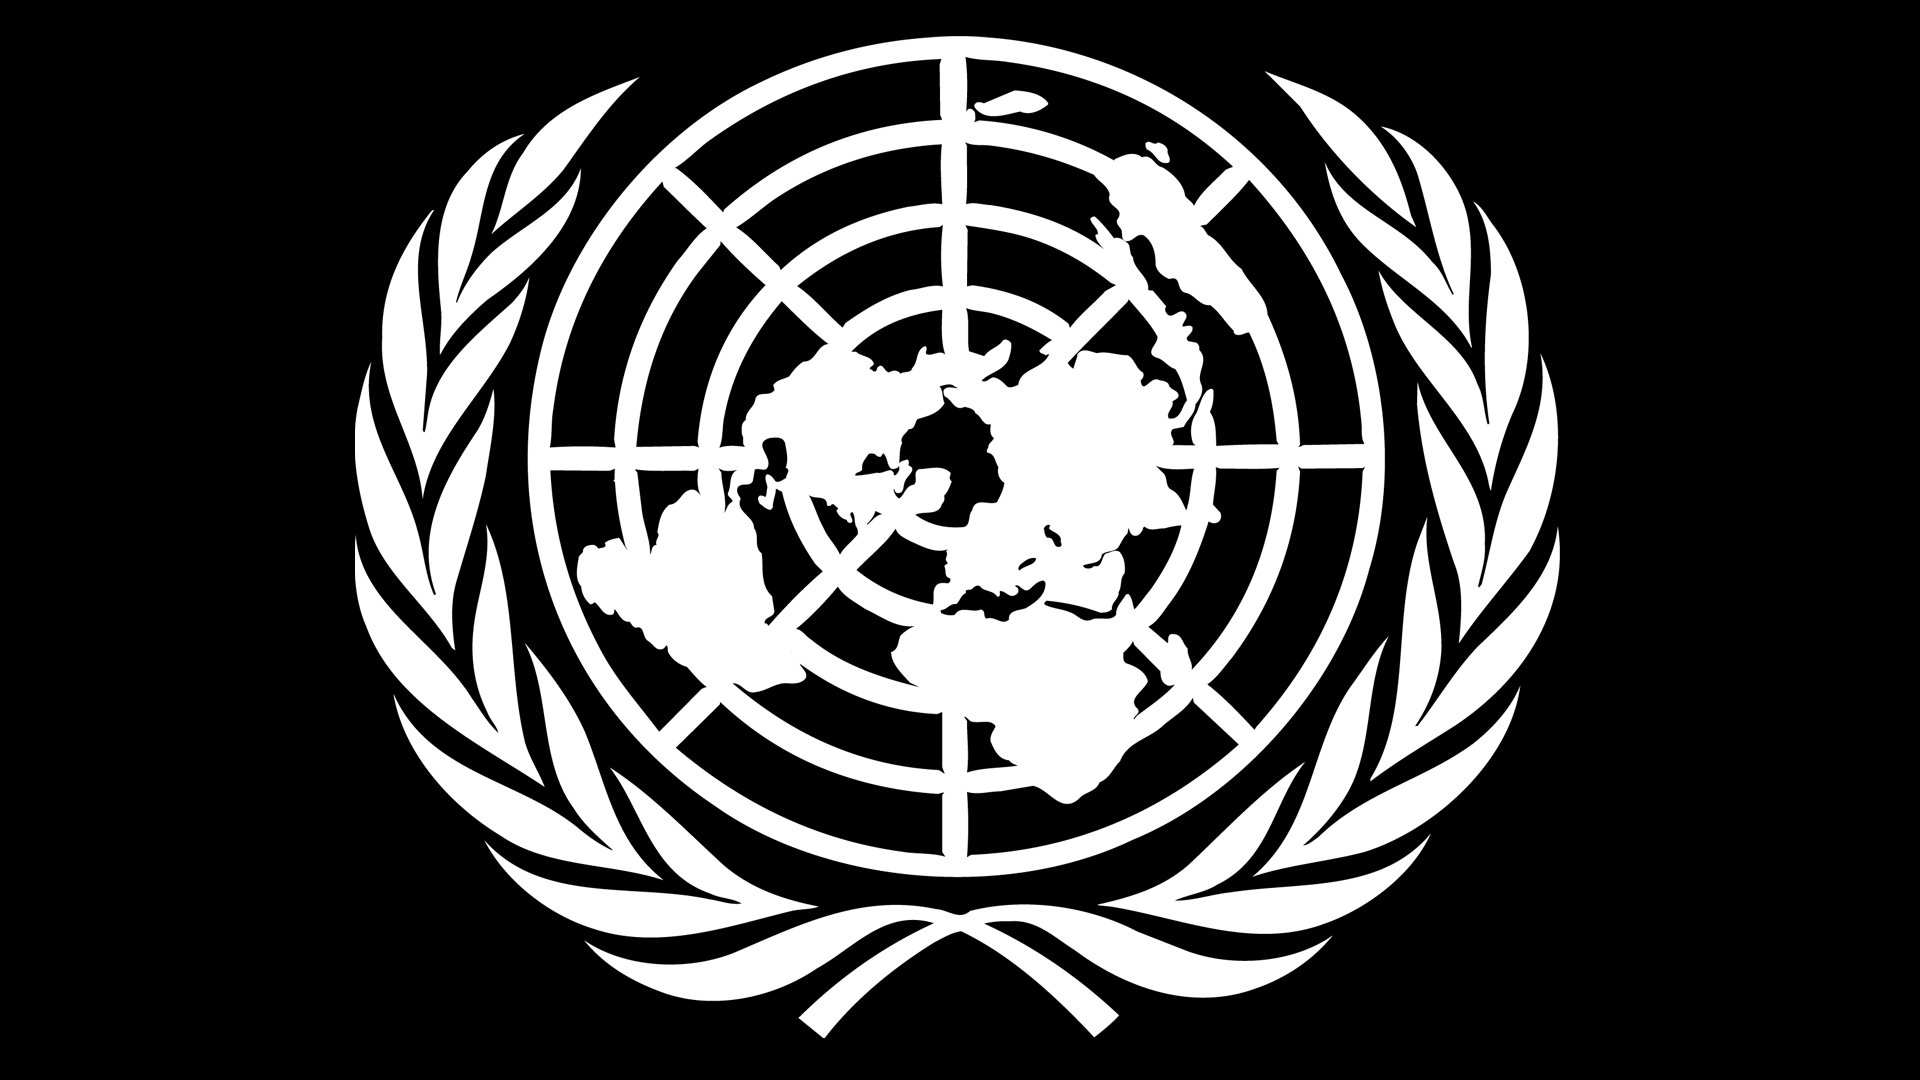 united nations general assembly logo